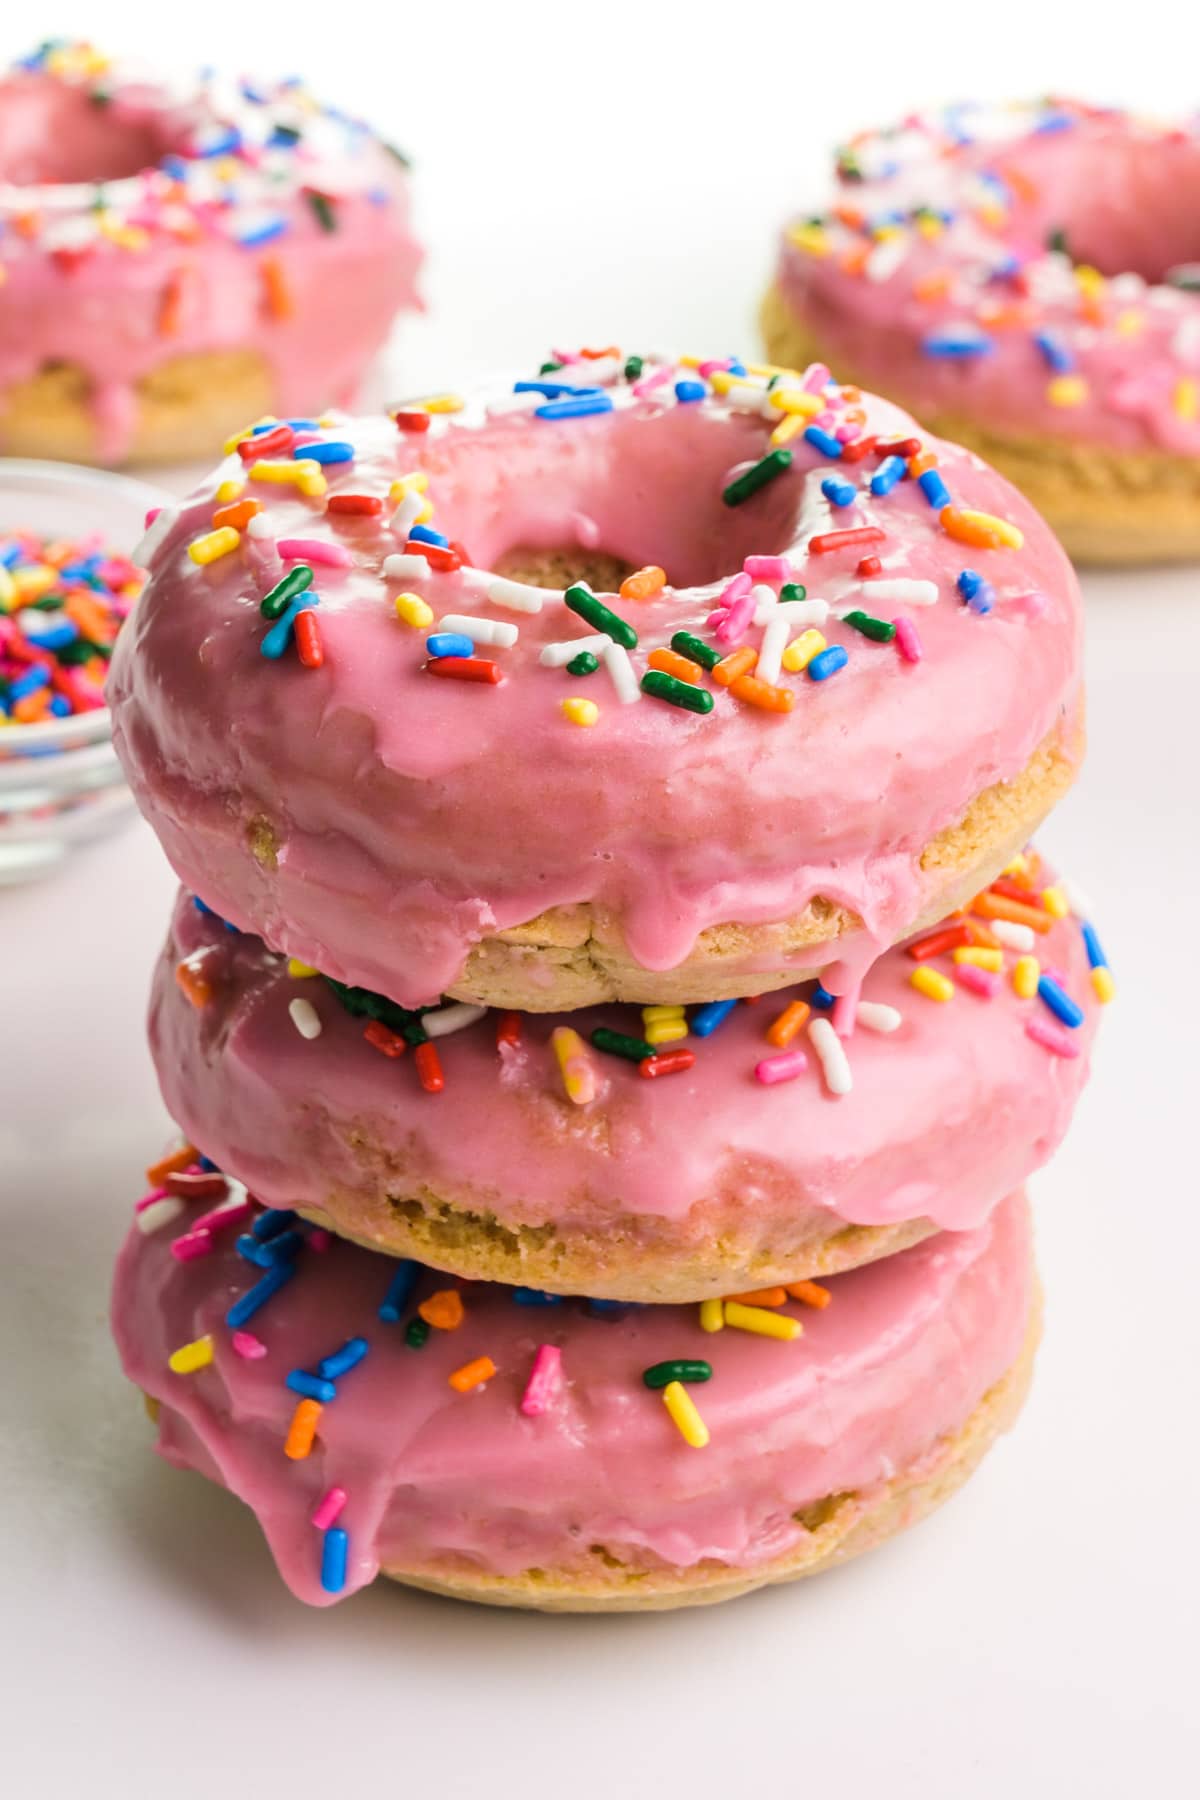 Three vegan gluten-free donuts are stacked and sitting in front of more donuts in the background.